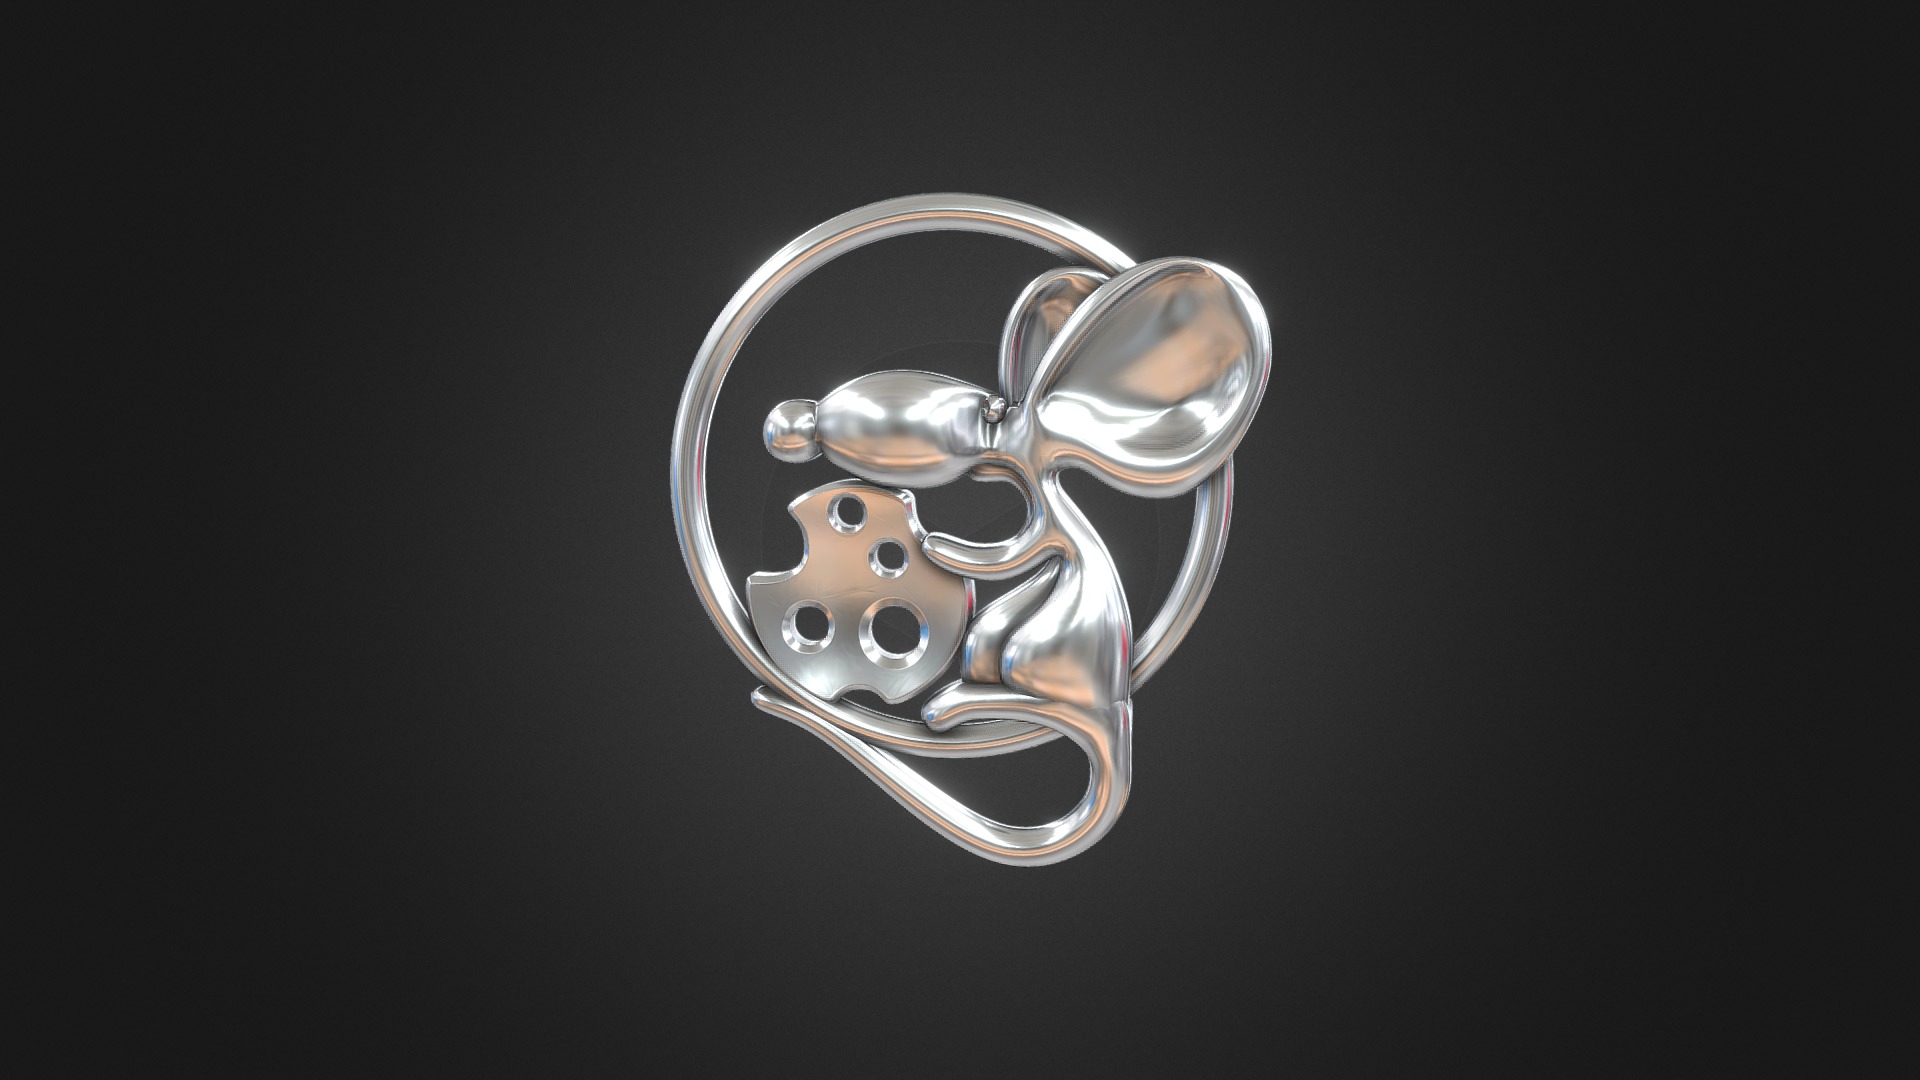 3D model 1166 – Pendant Mouse - This is a 3D model of the 1166 - Pendant Mouse. The 3D model is about a silver ring with a black background.